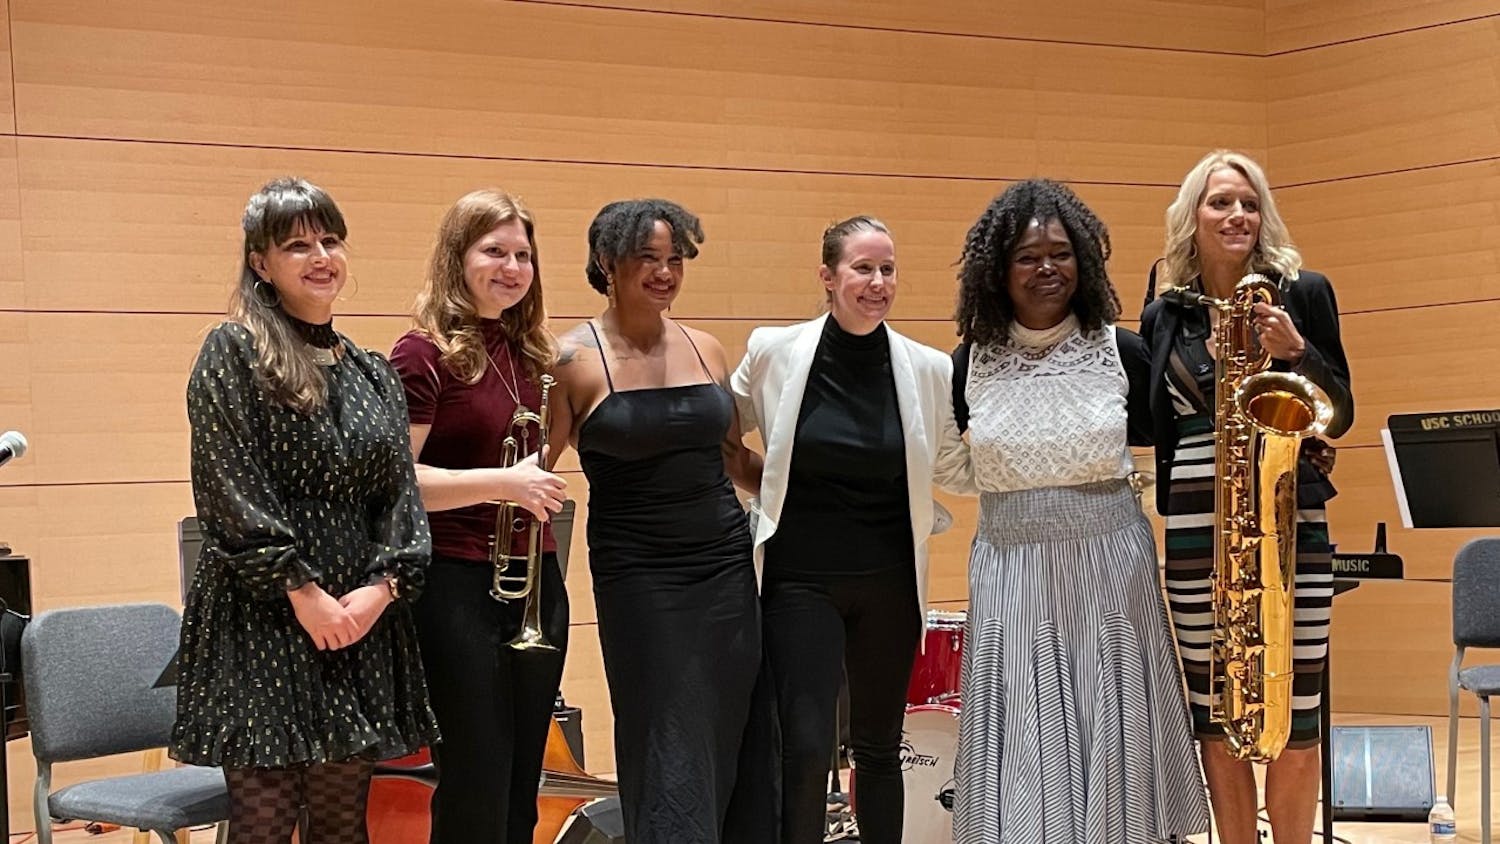 CC &amp; The Adelitas members pictured after their live debut concert on Oct. 25, 2021, at the Darla Moore School of Business Johnson Performance Hall. The all-female, professor-led band represents intersectionality and embraces Mexican culture in jazz music.